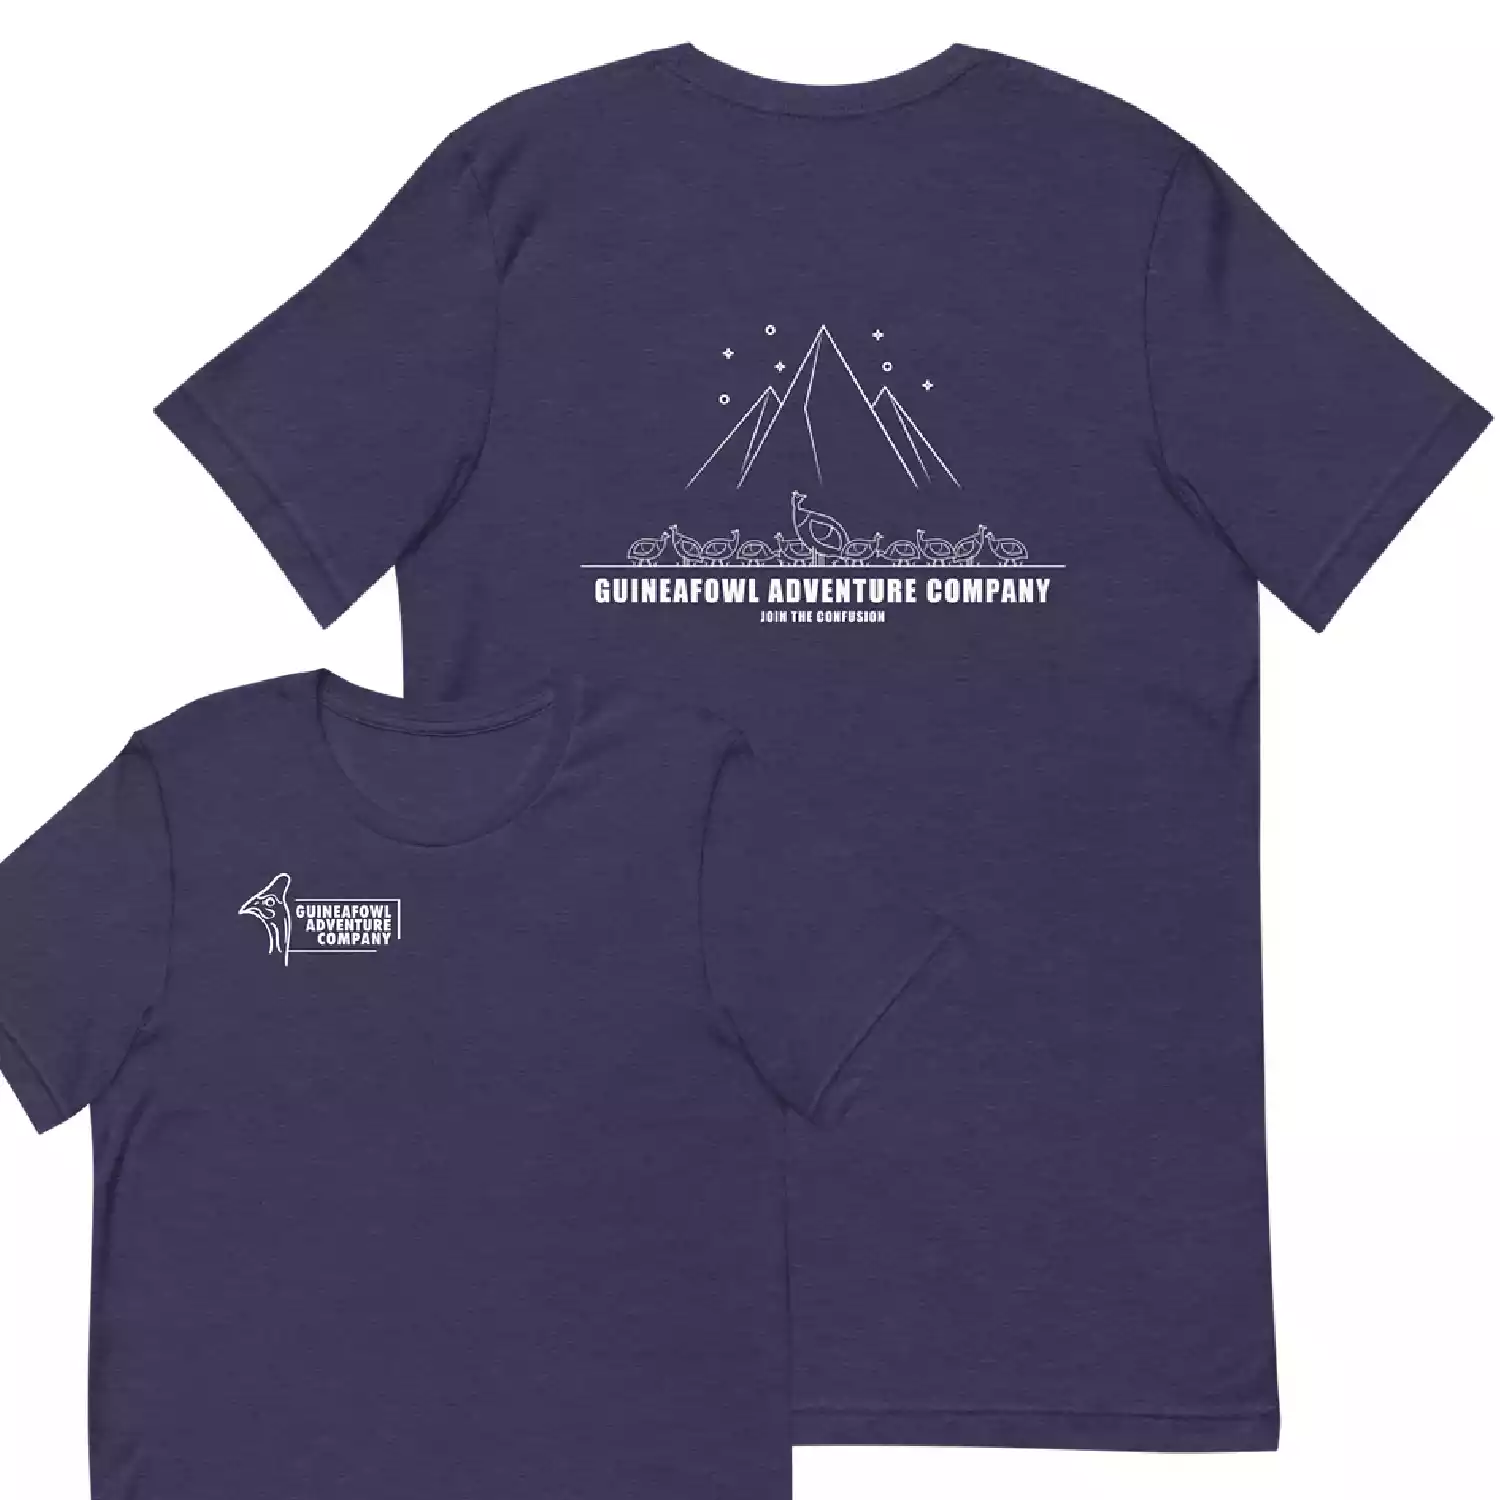 Guineafowl Adventure Company - The Perfect Gifts for the Hiker and Adventure Enthusiast